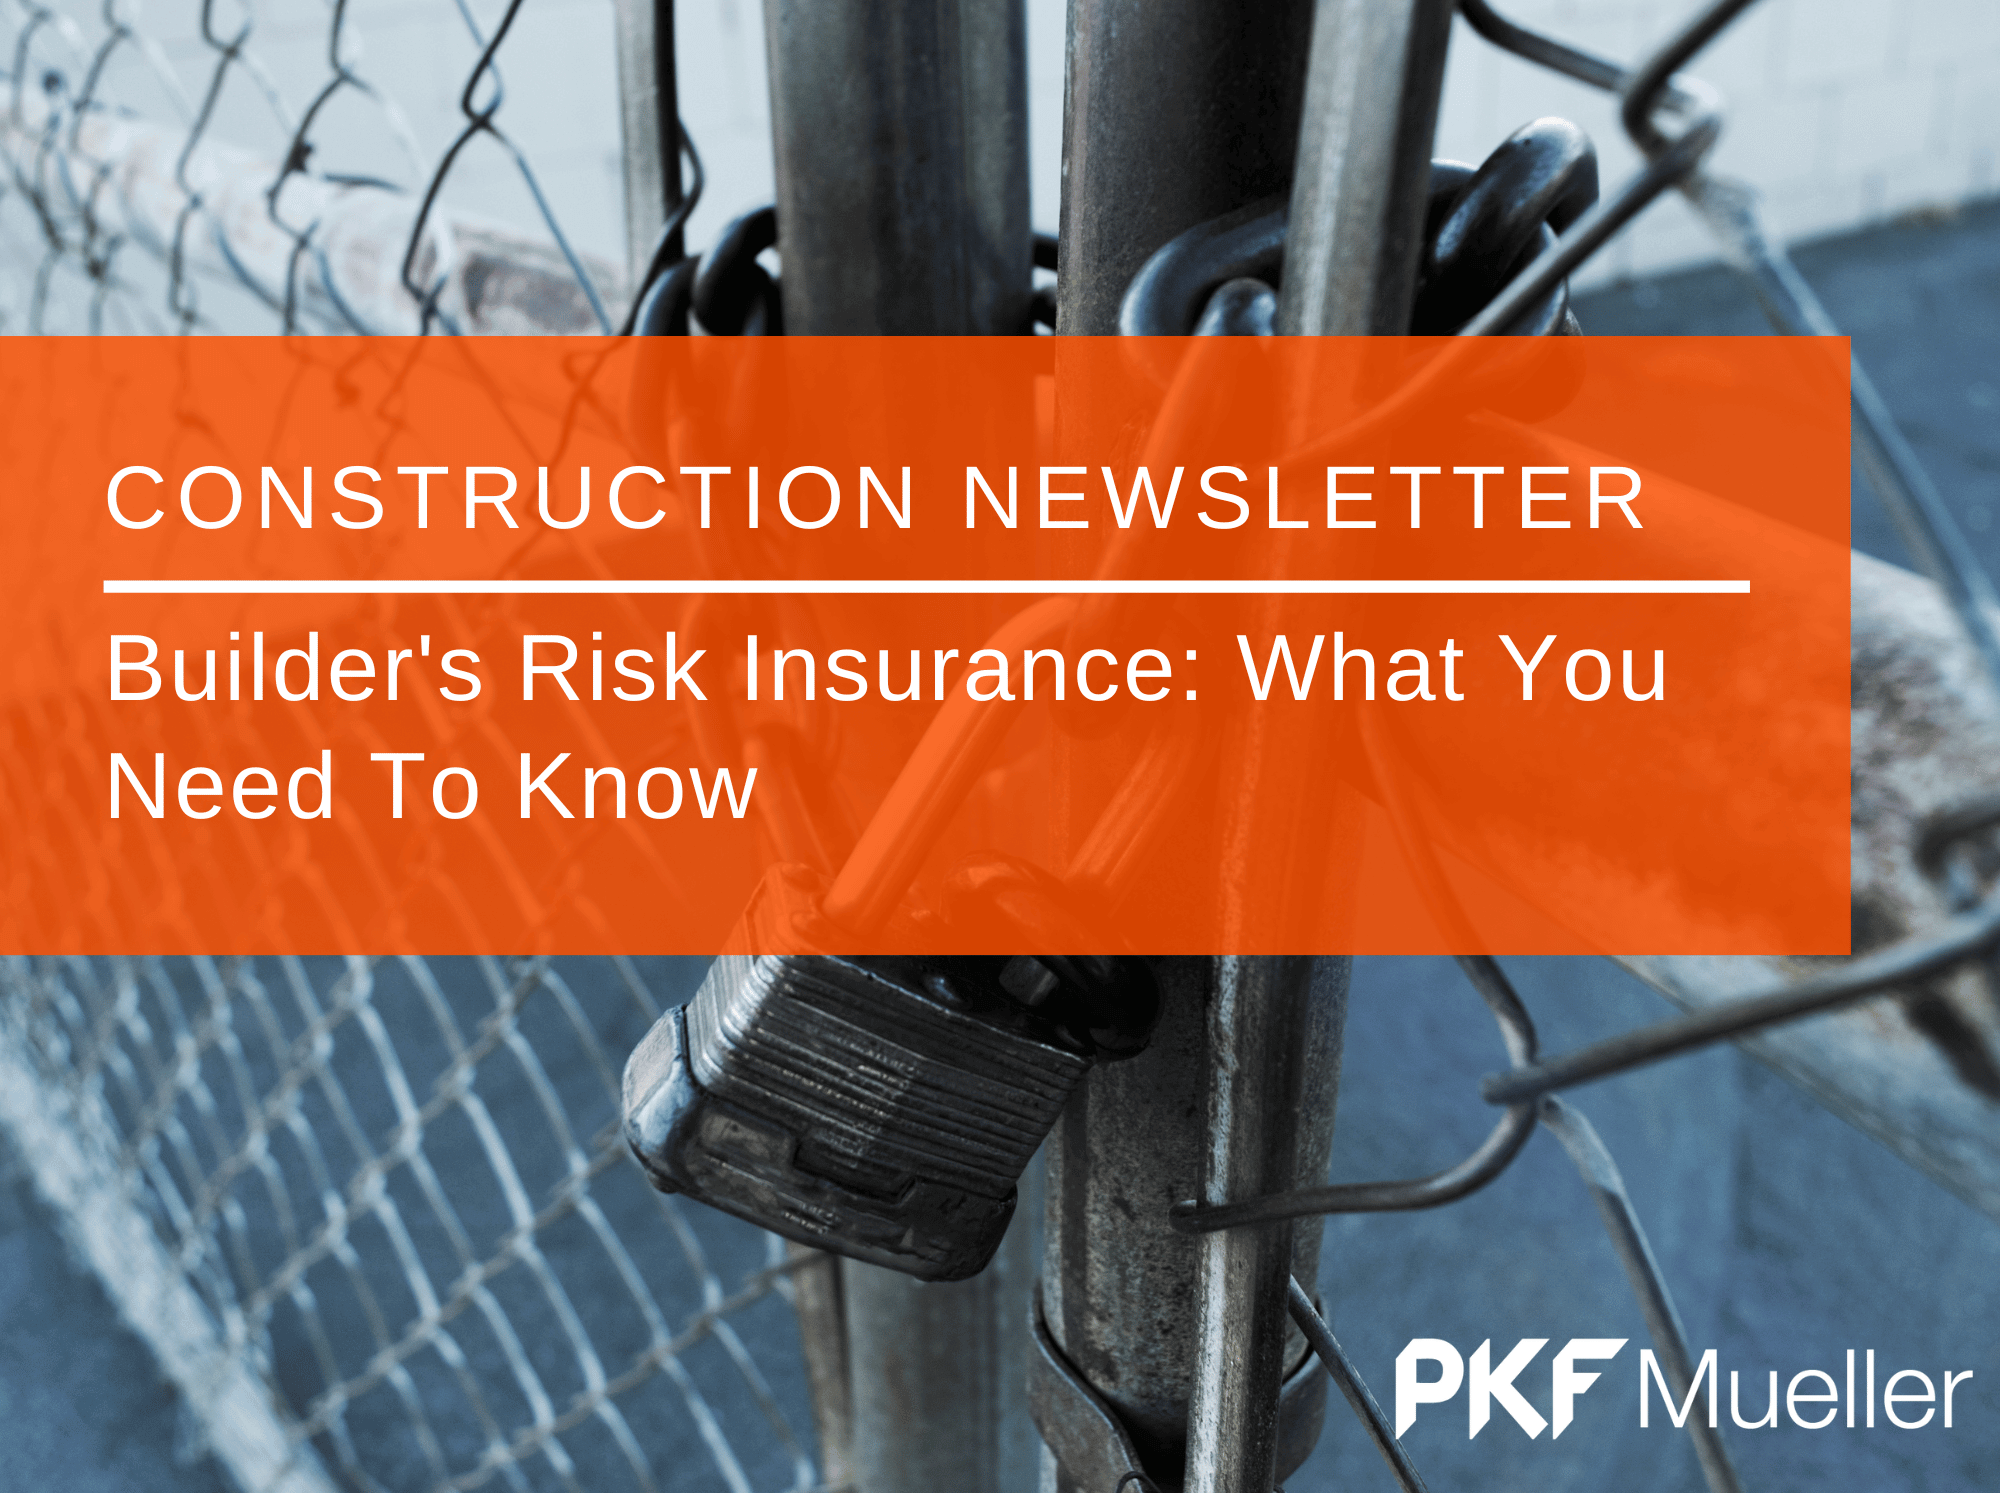 Builder's Risk Insurance: What You Need To Know